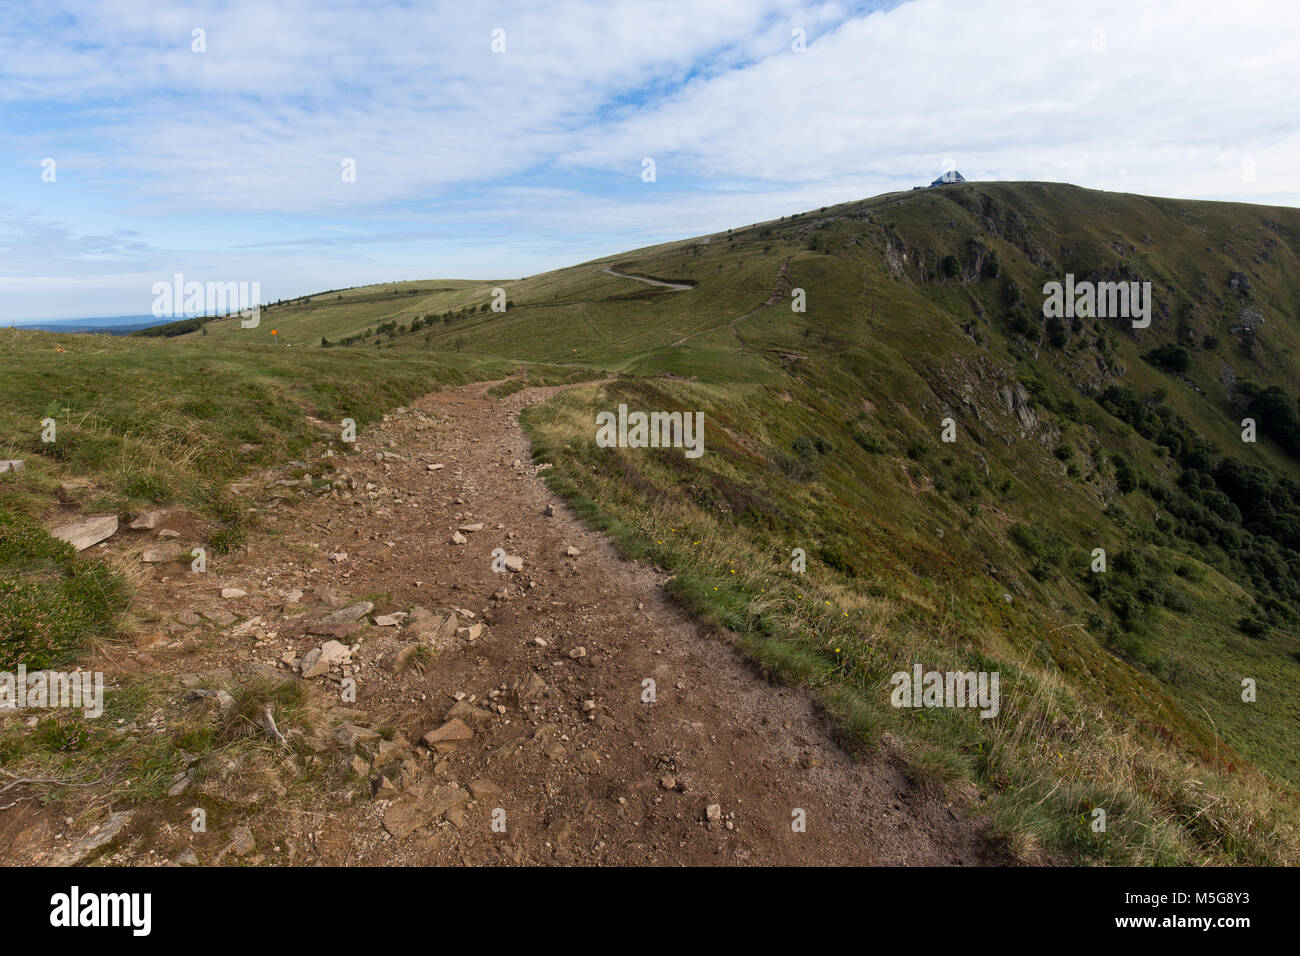 Hikinh trail on the Hohneck mountain, Vosges, France. Stock Photo